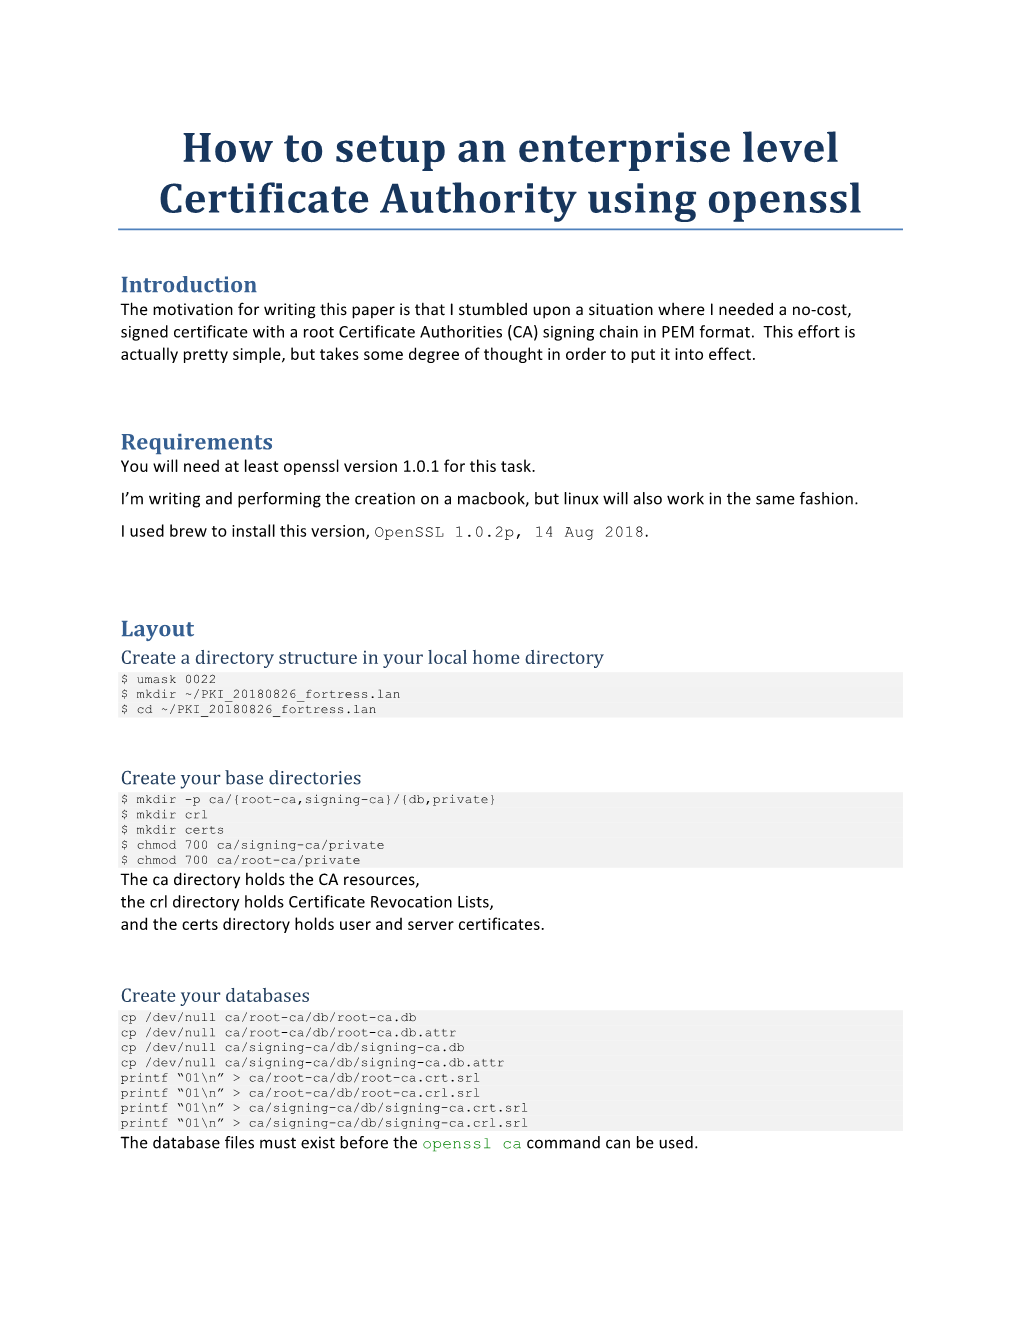 How to Setup an Enterprise Level Certificate Authority Using Openssl